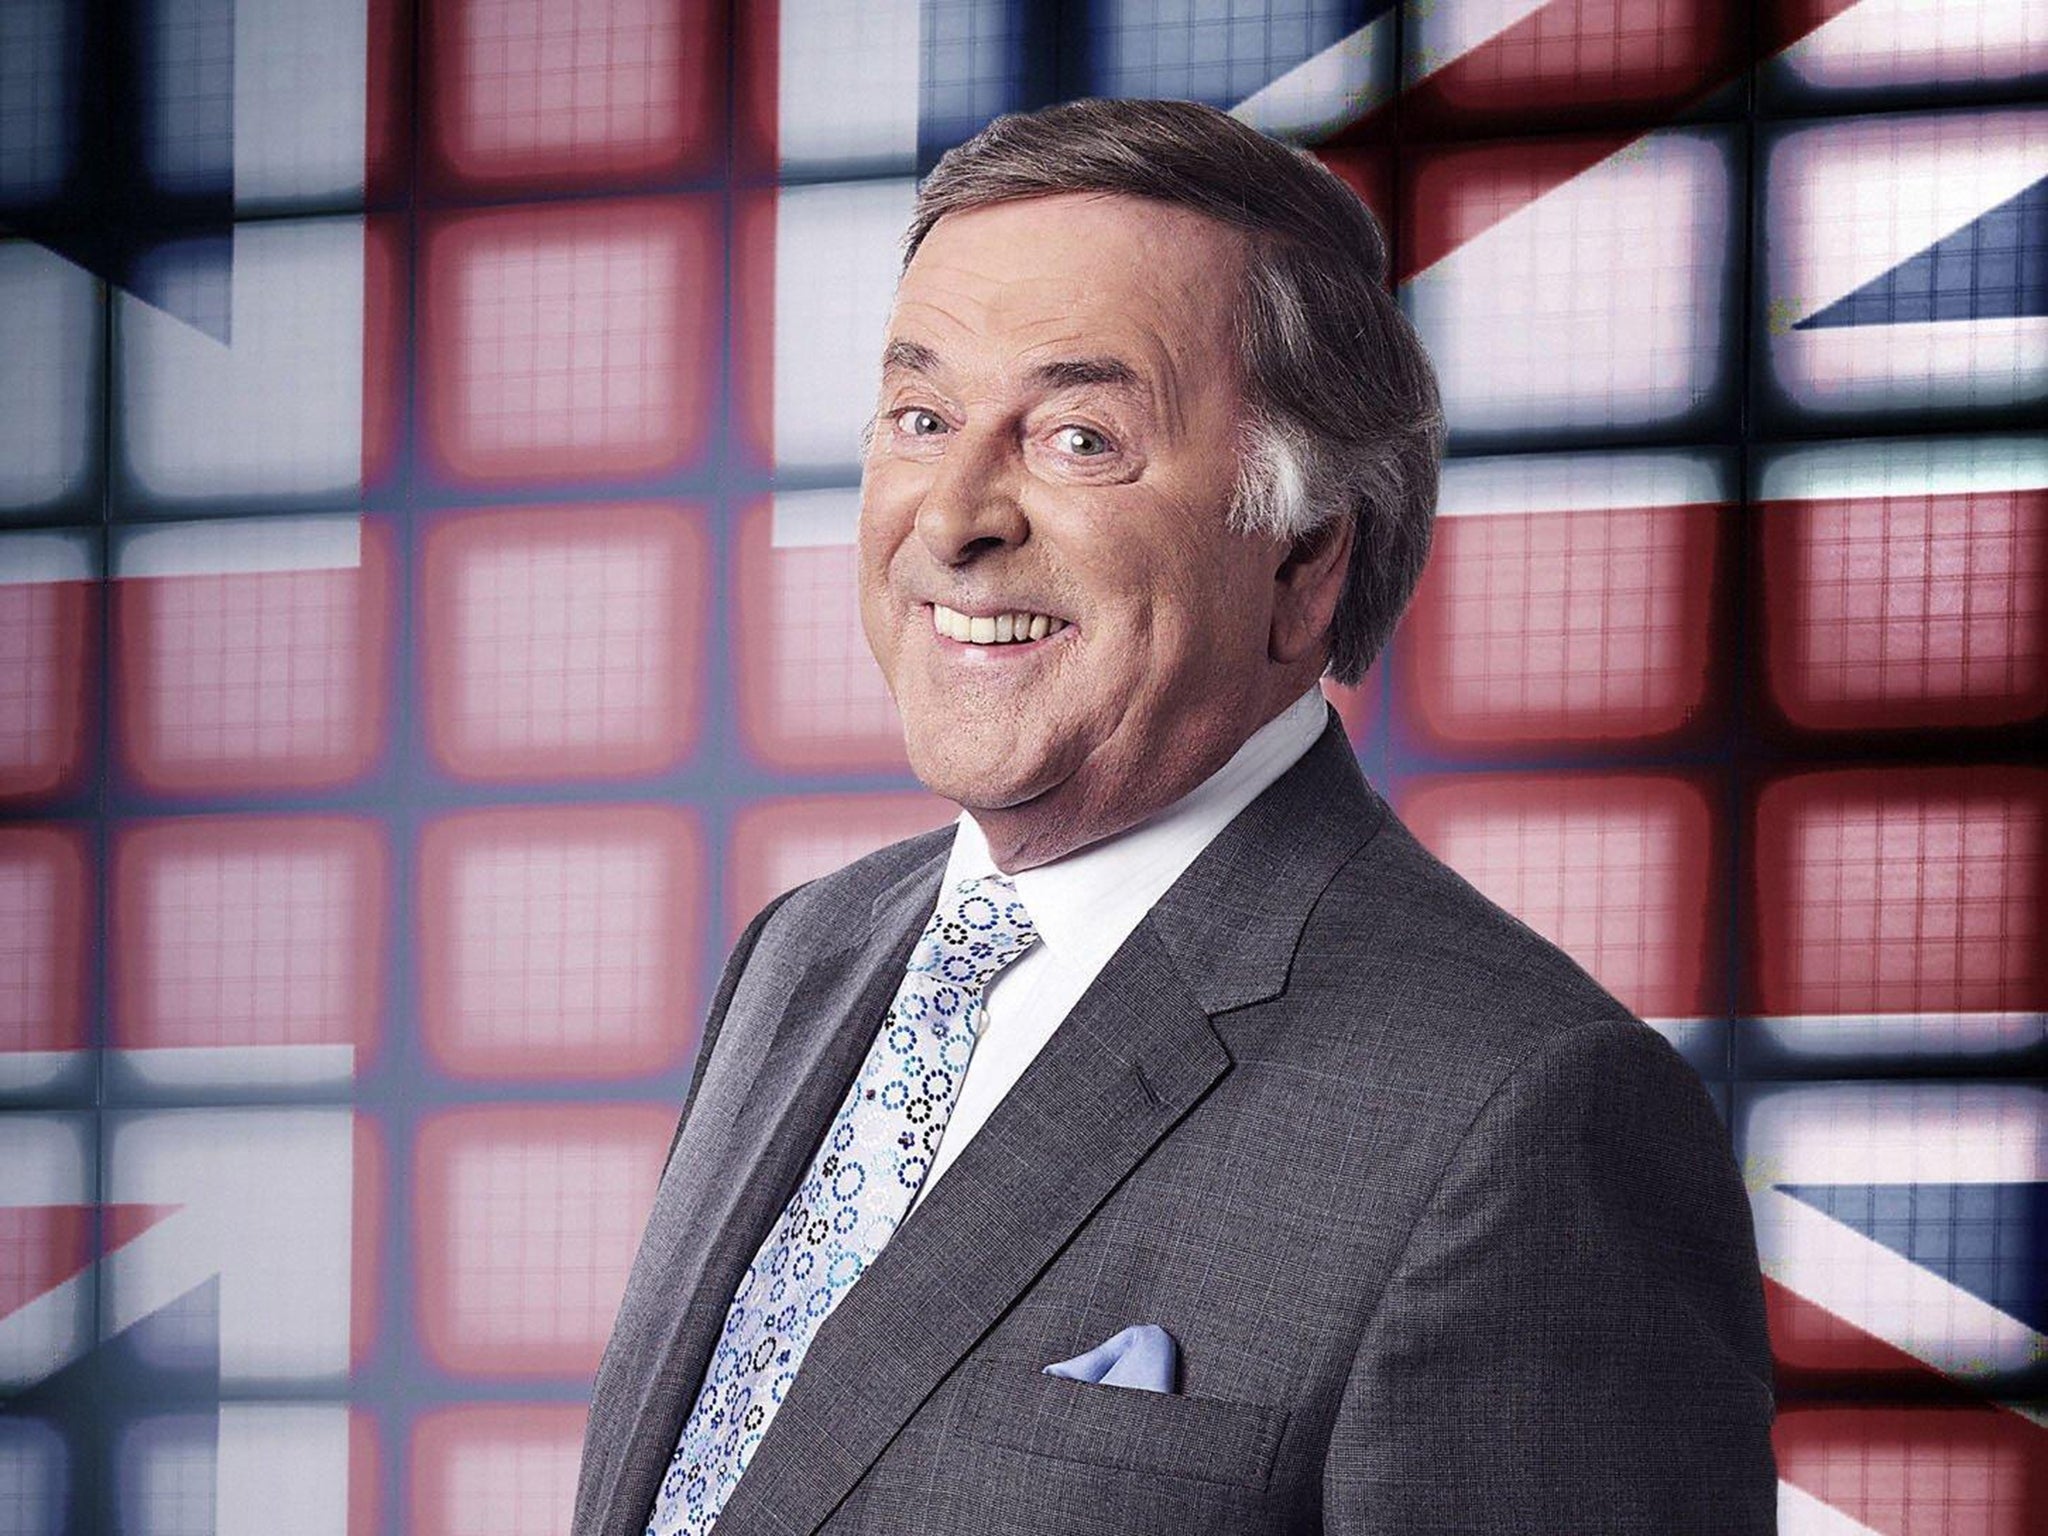 Sir Terry Wogan was 'the voice of Eurovision' until he passed the baton to Graham Norton in 2008